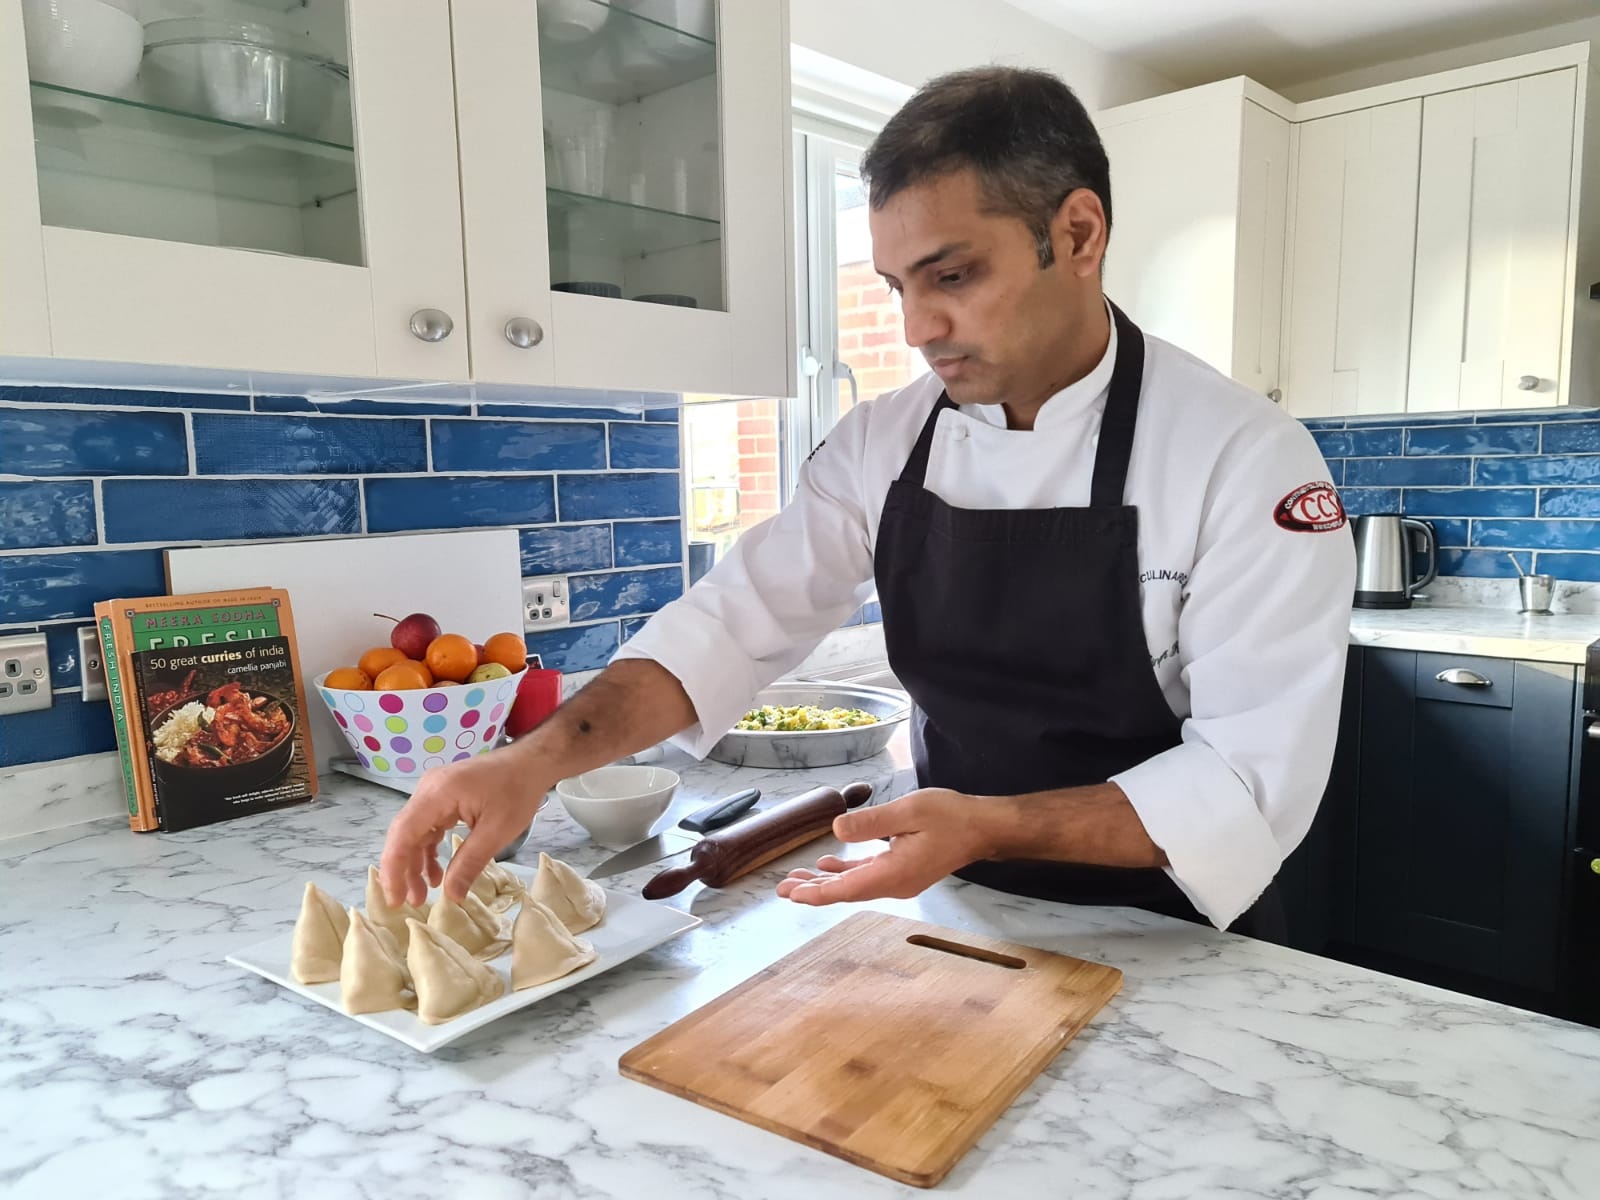 Male in chef whites and dark blue apron preparing samosas in a professional kitchen.